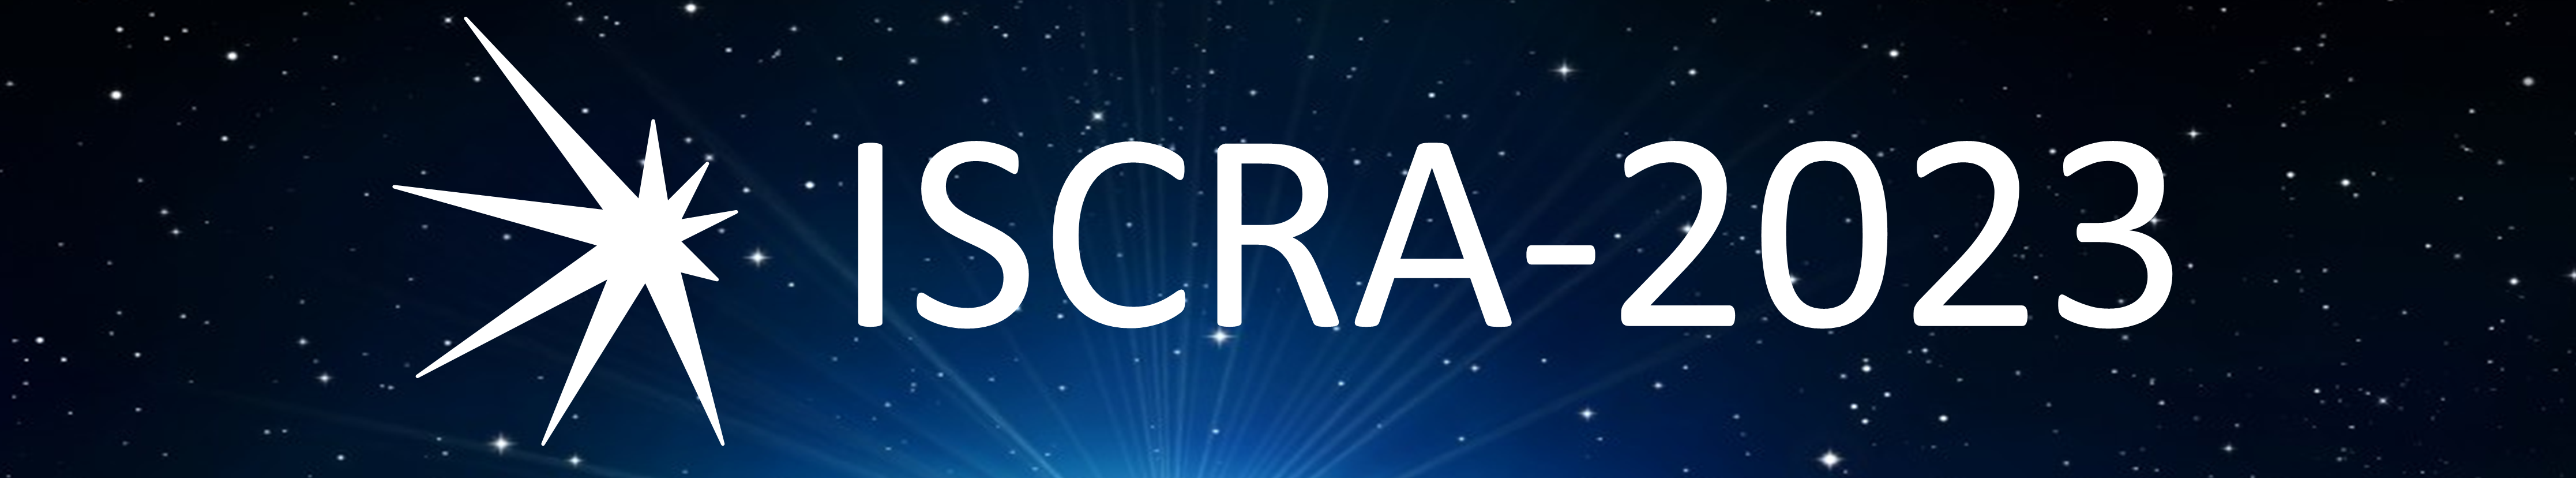 The 4th International Symposium on Cosmic Rays and Astrophysics (ISCRA